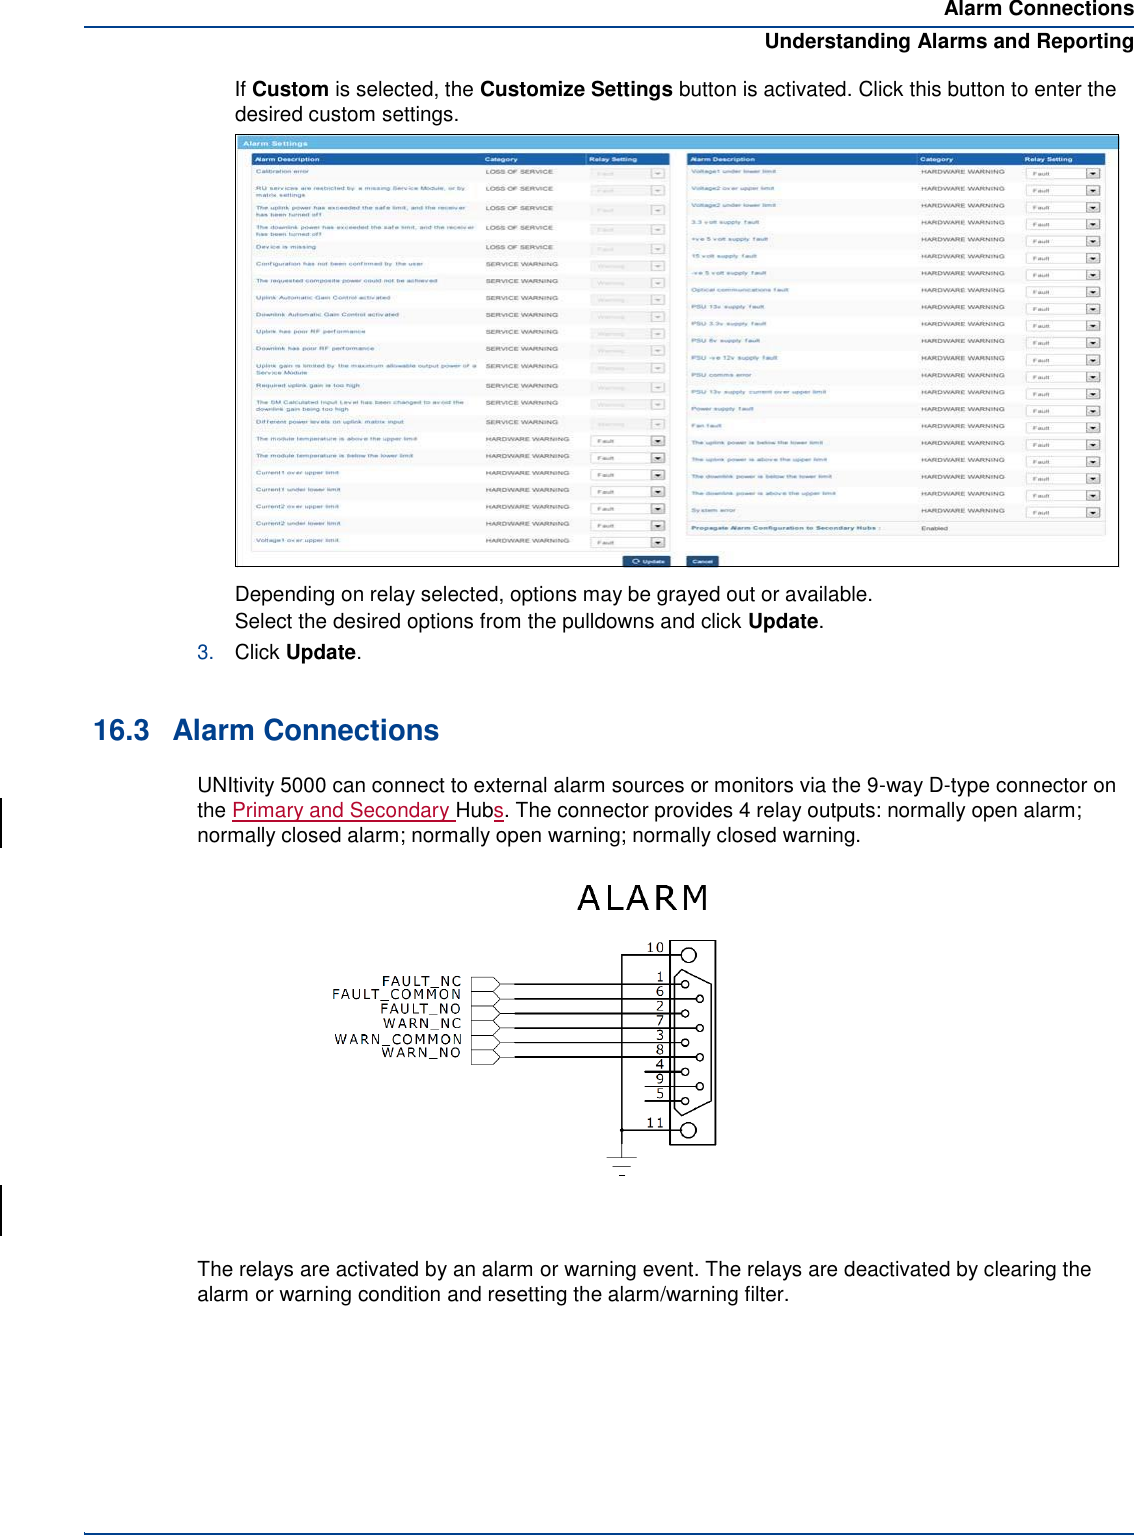 Alarm Connections Understanding Alarms and Reporting If Custom is selected, the Customize Settings button is activated. Click this button to enter the desired custom settings. Depending on relay selected, options may be grayed out or available. Select the desired options from the pulldowns and click Update. 3. Click Update.   16.3  Alarm Connections UNItivity 5000 can connect to external alarm sources or monitors via the 9-way D-type connector on the Primary and Secondary Hubs. The connector provides 4 relay outputs: normally open alarm; normally closed alarm; normally open warning; normally closed warning.  The relays are activated by an alarm or warning event. The relays are deactivated by clearing the alarm or warning condition and resetting the alarm/warning filter.           